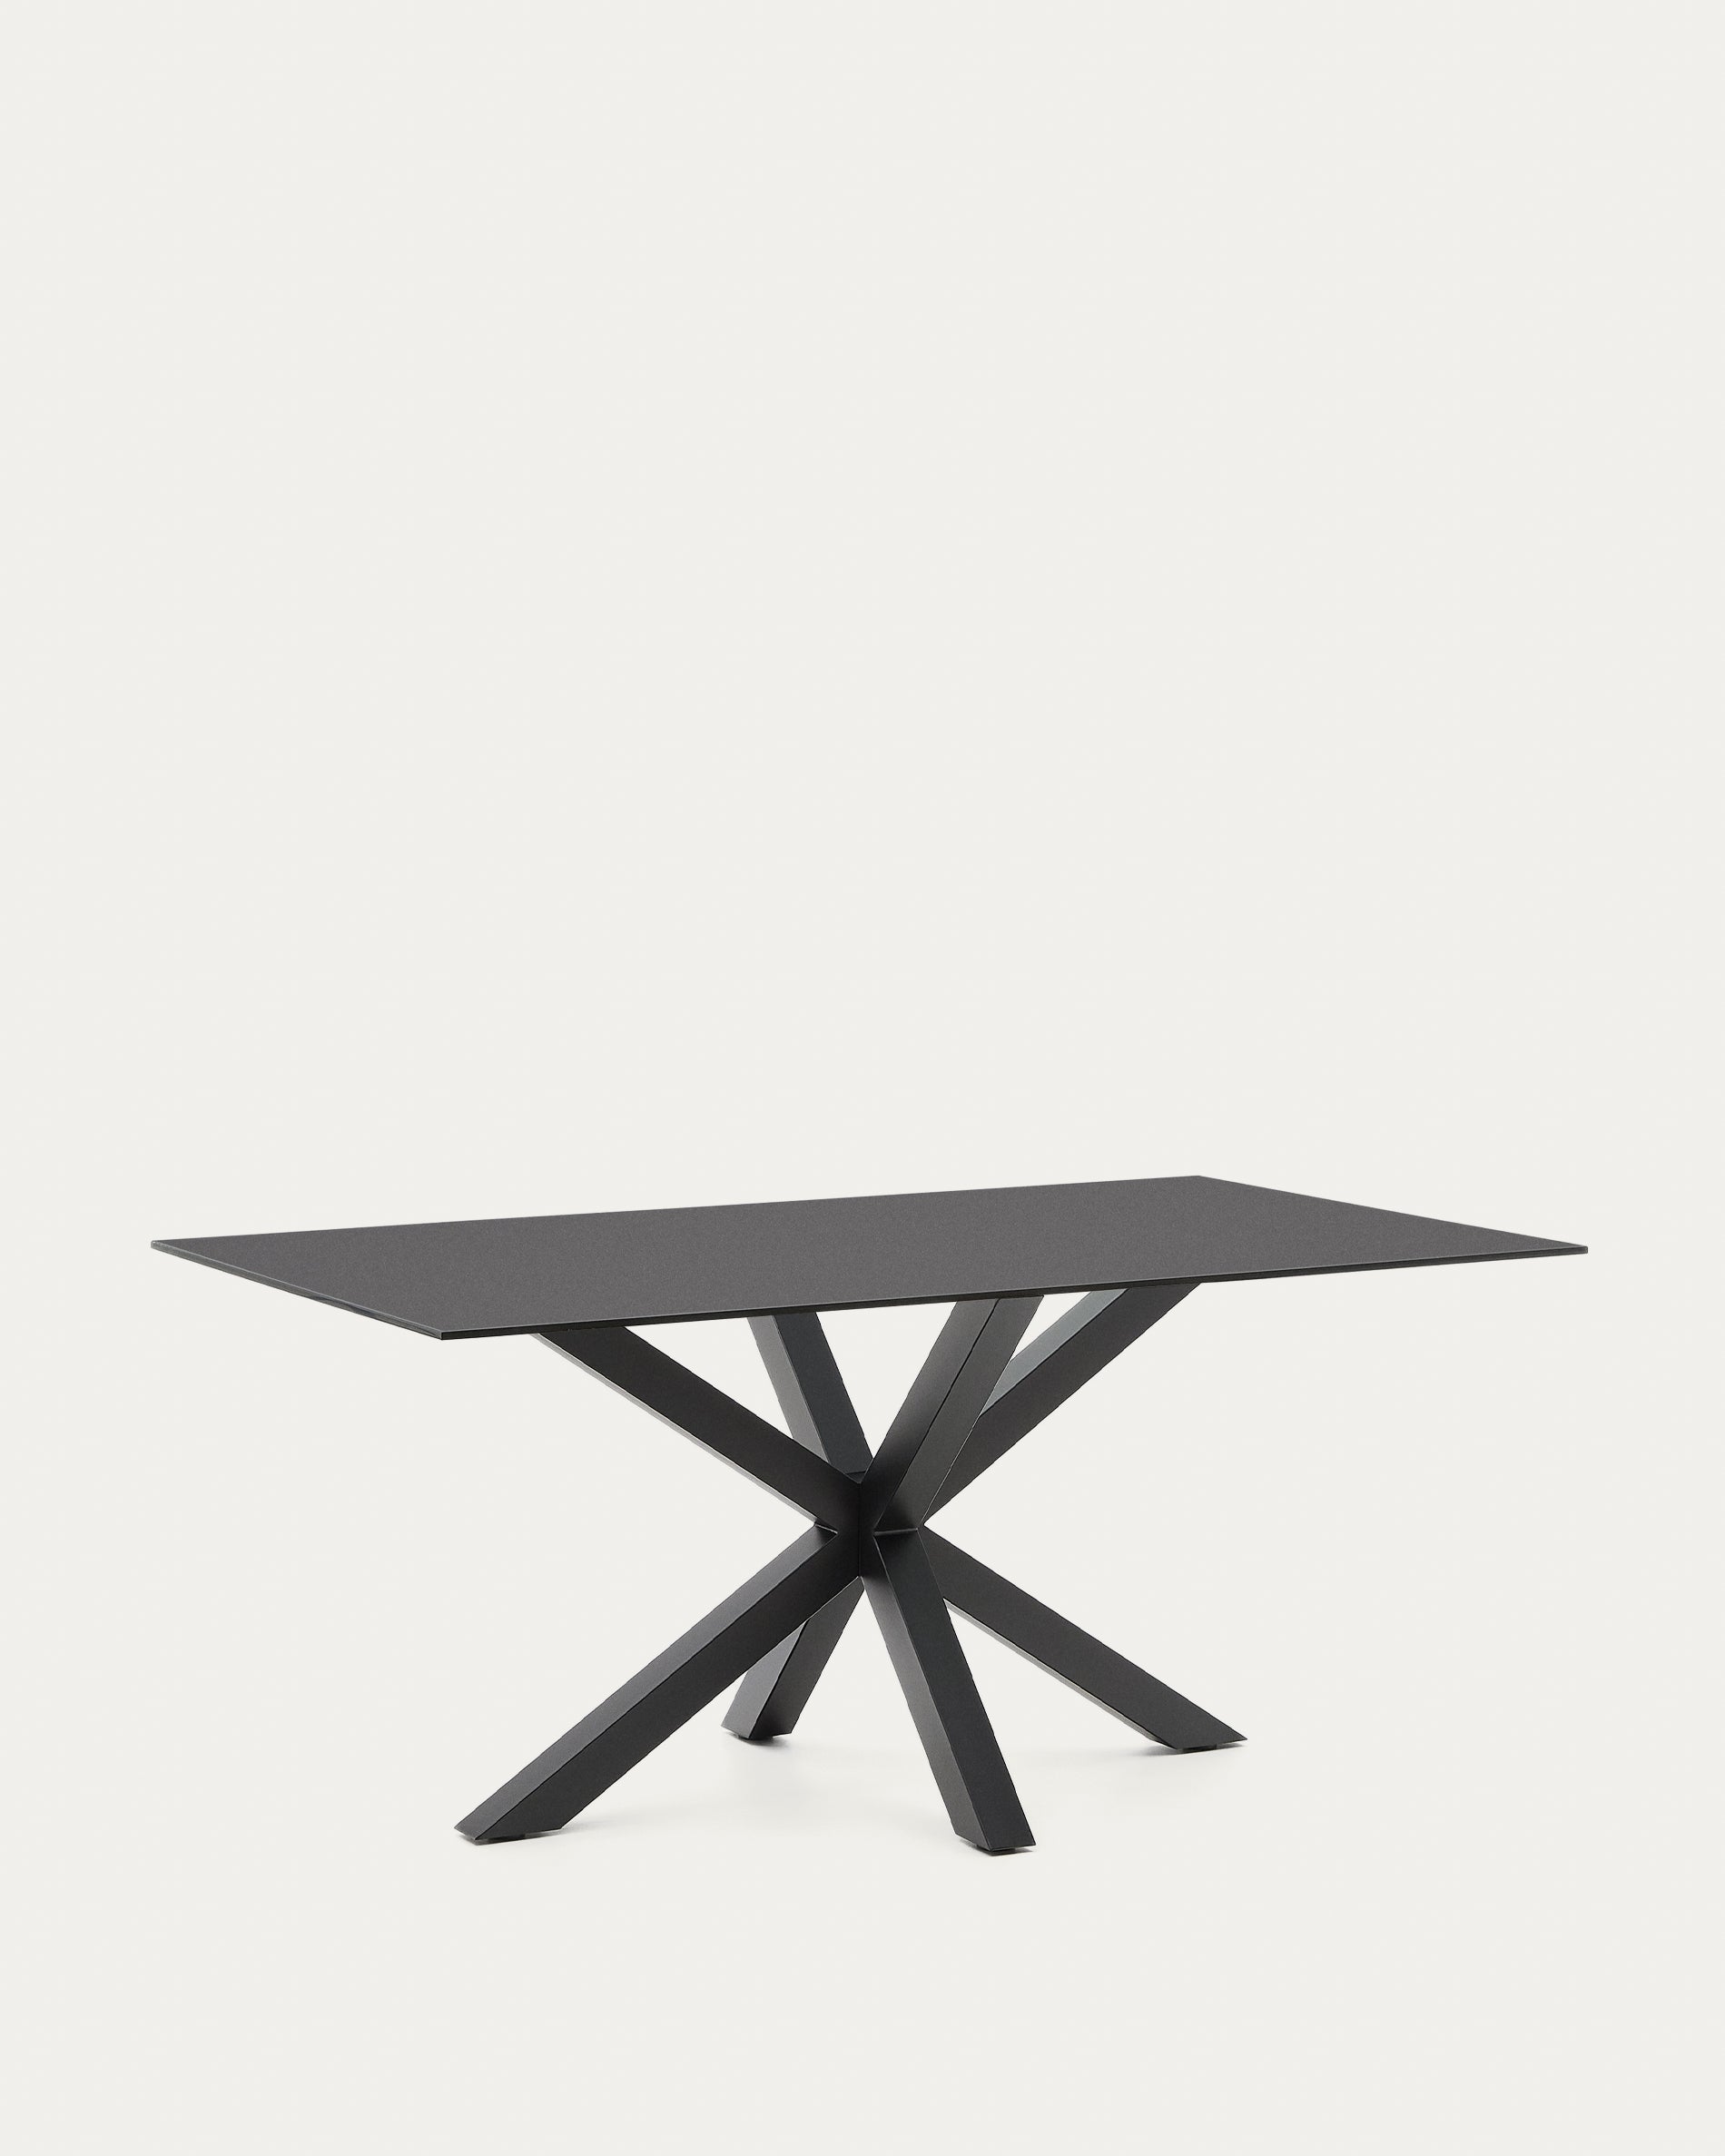 Argo table with black glass and black steel legs 160 x 190 cm